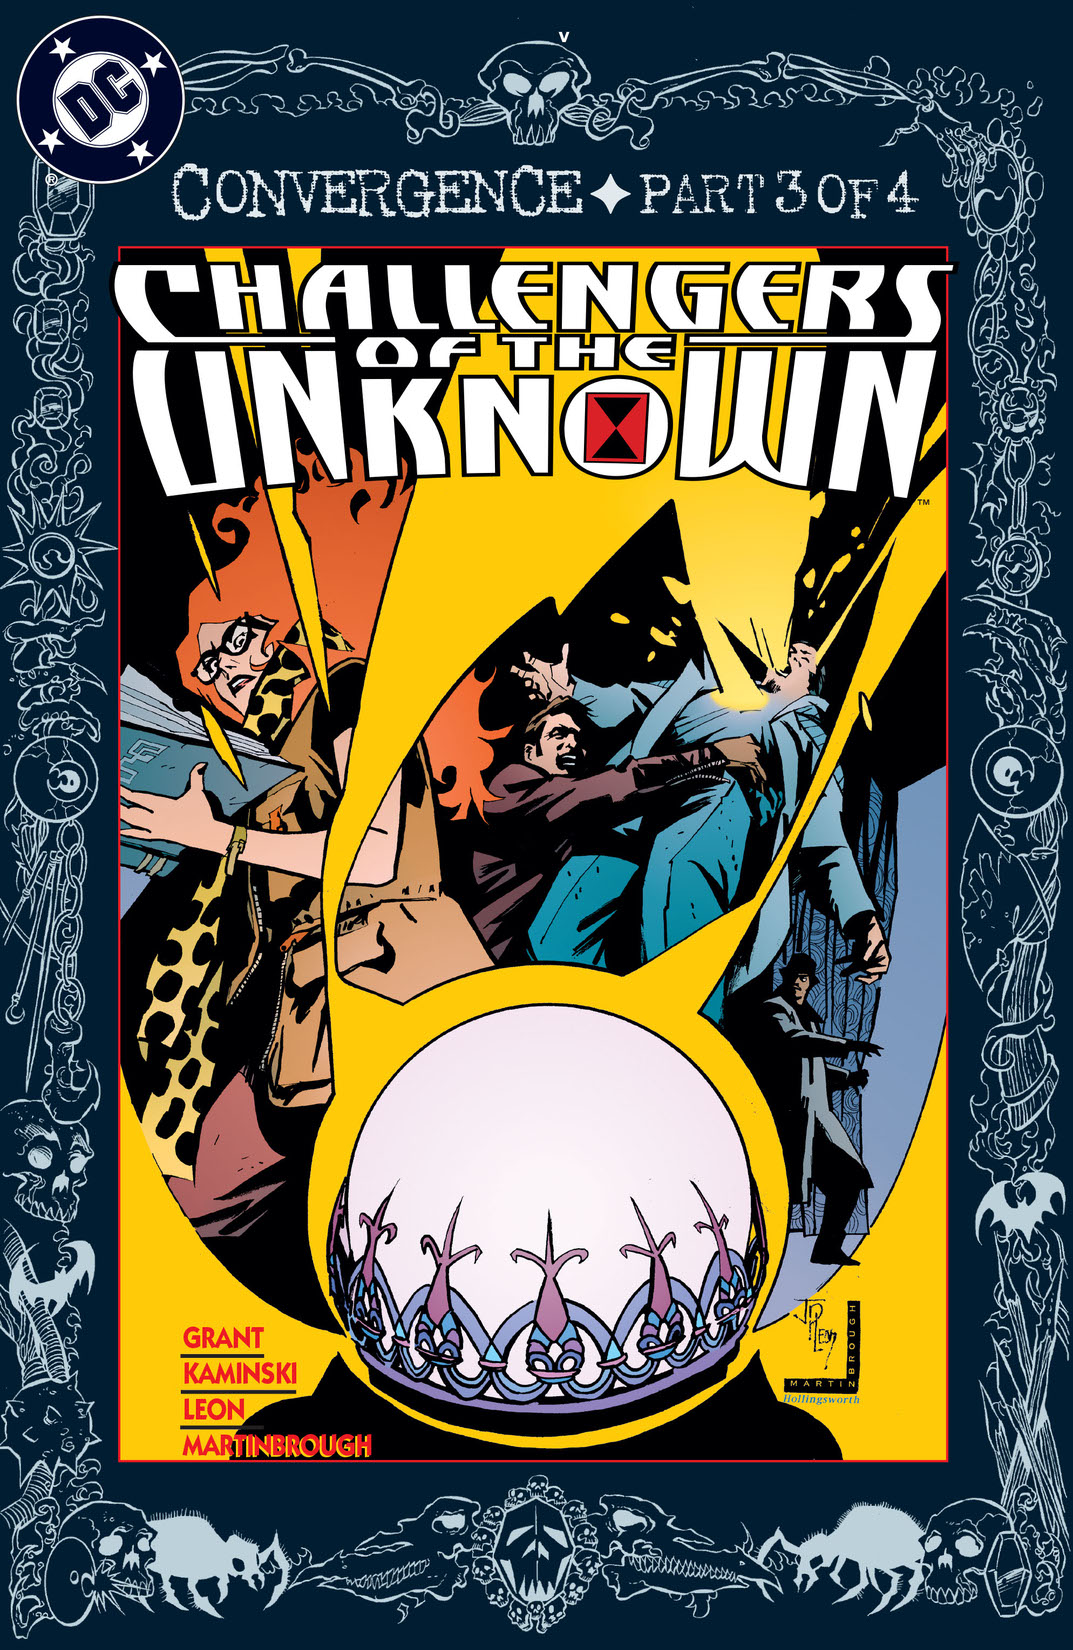 Challengers of the Unknown (1996-) #6 preview images